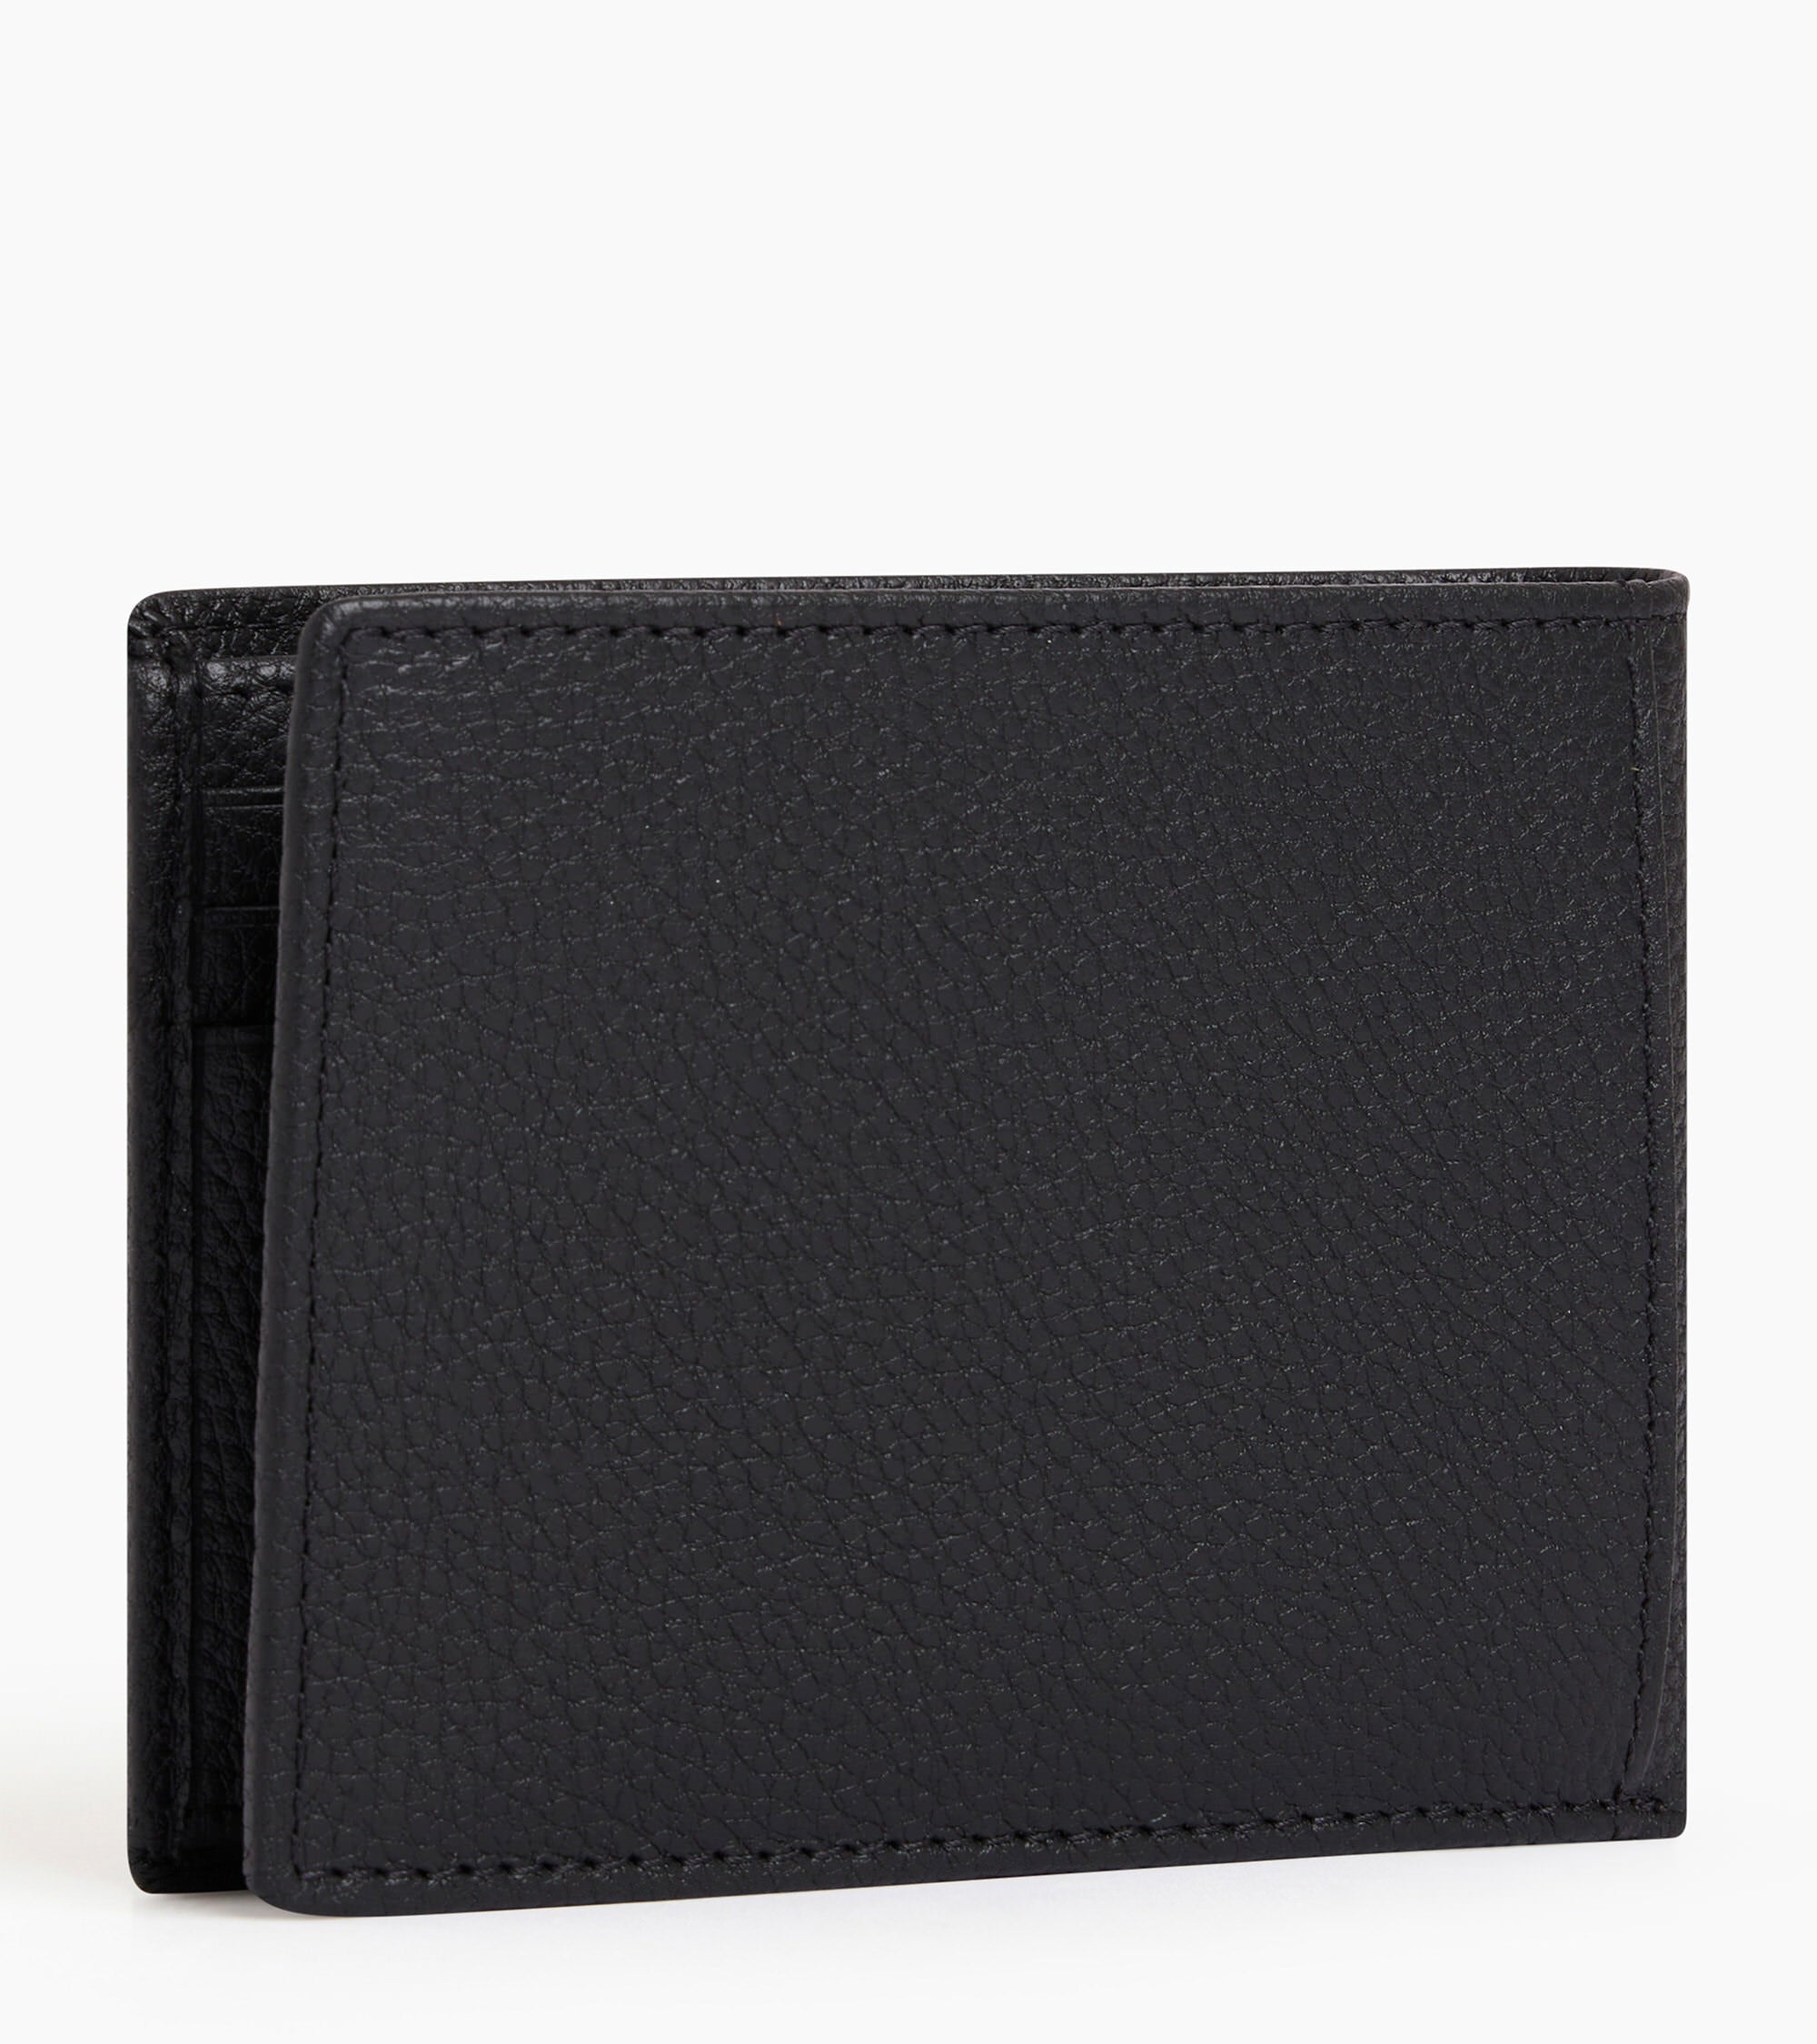 Charles flap wallet with 2 gussets in grained leather